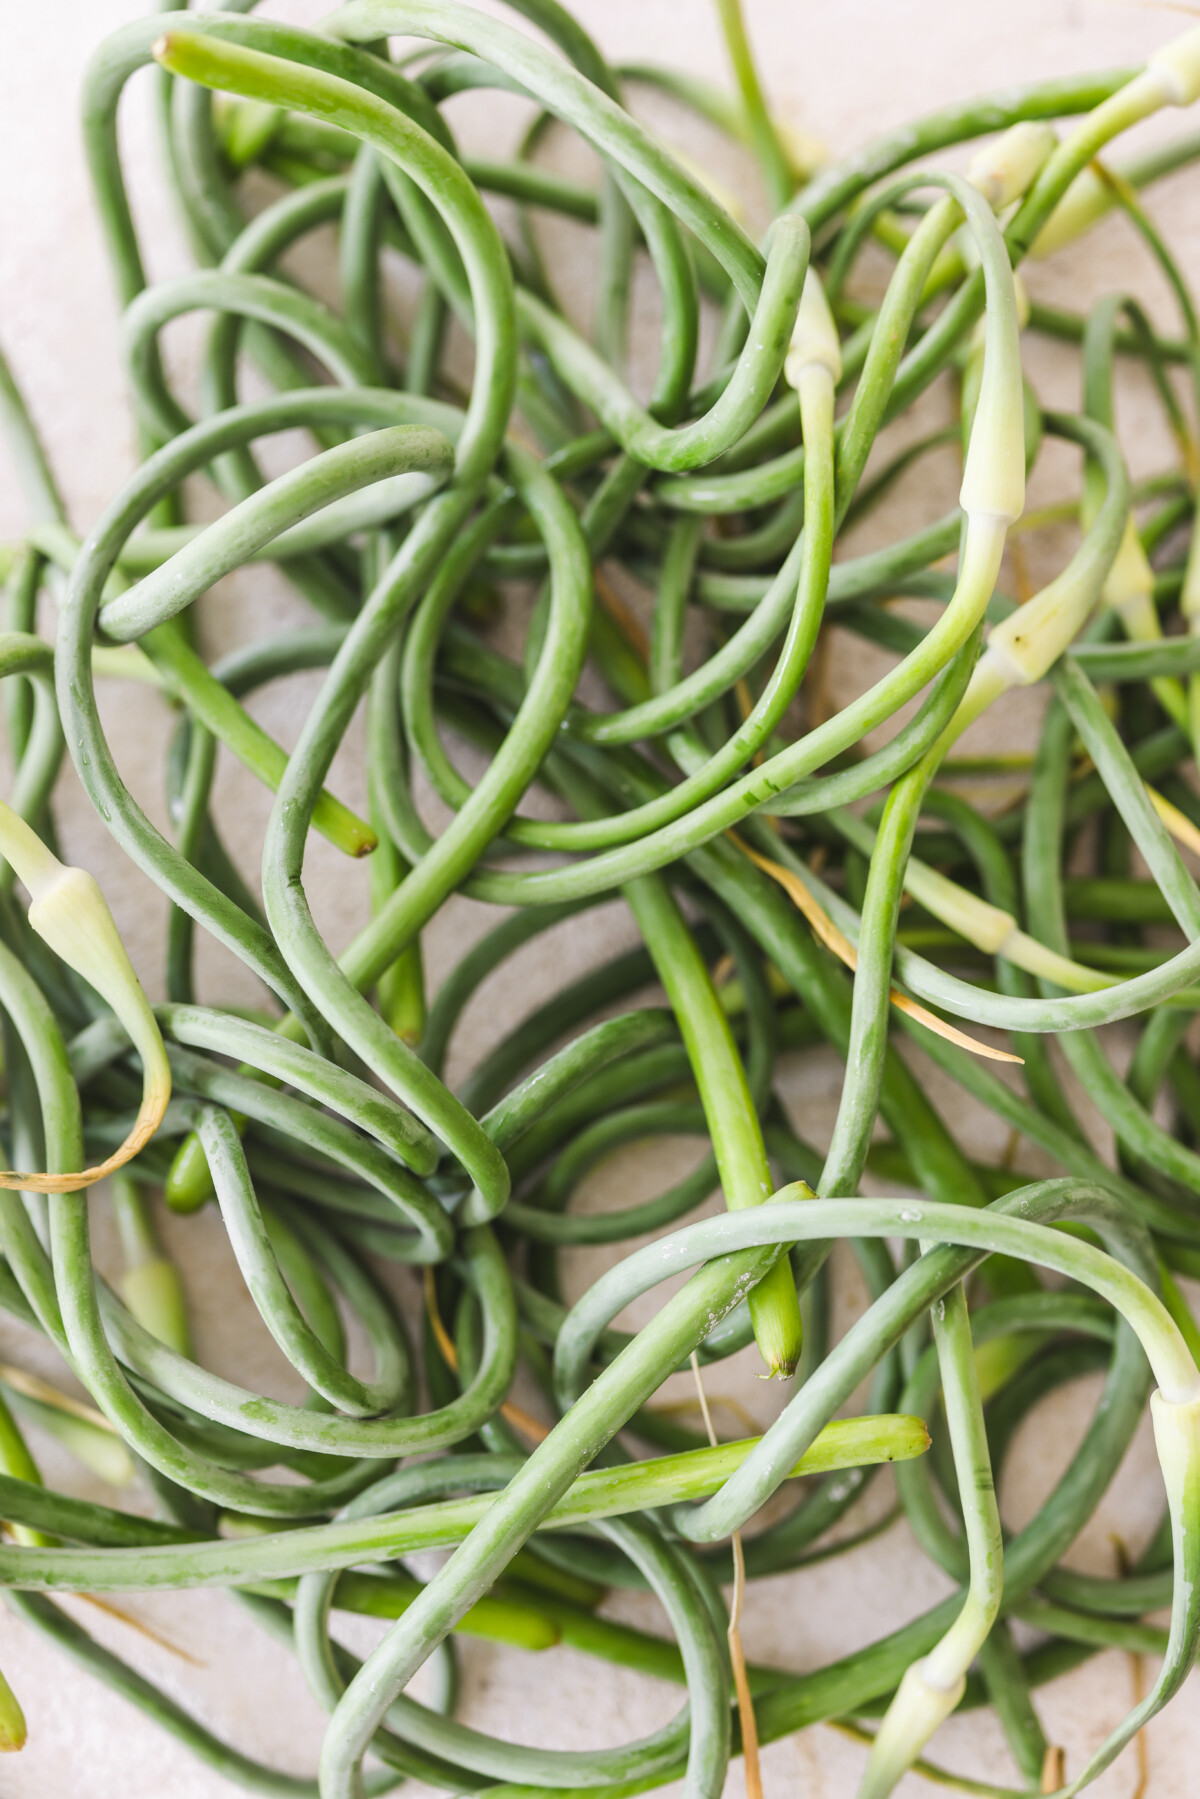 garlic scapes in their vegetable form